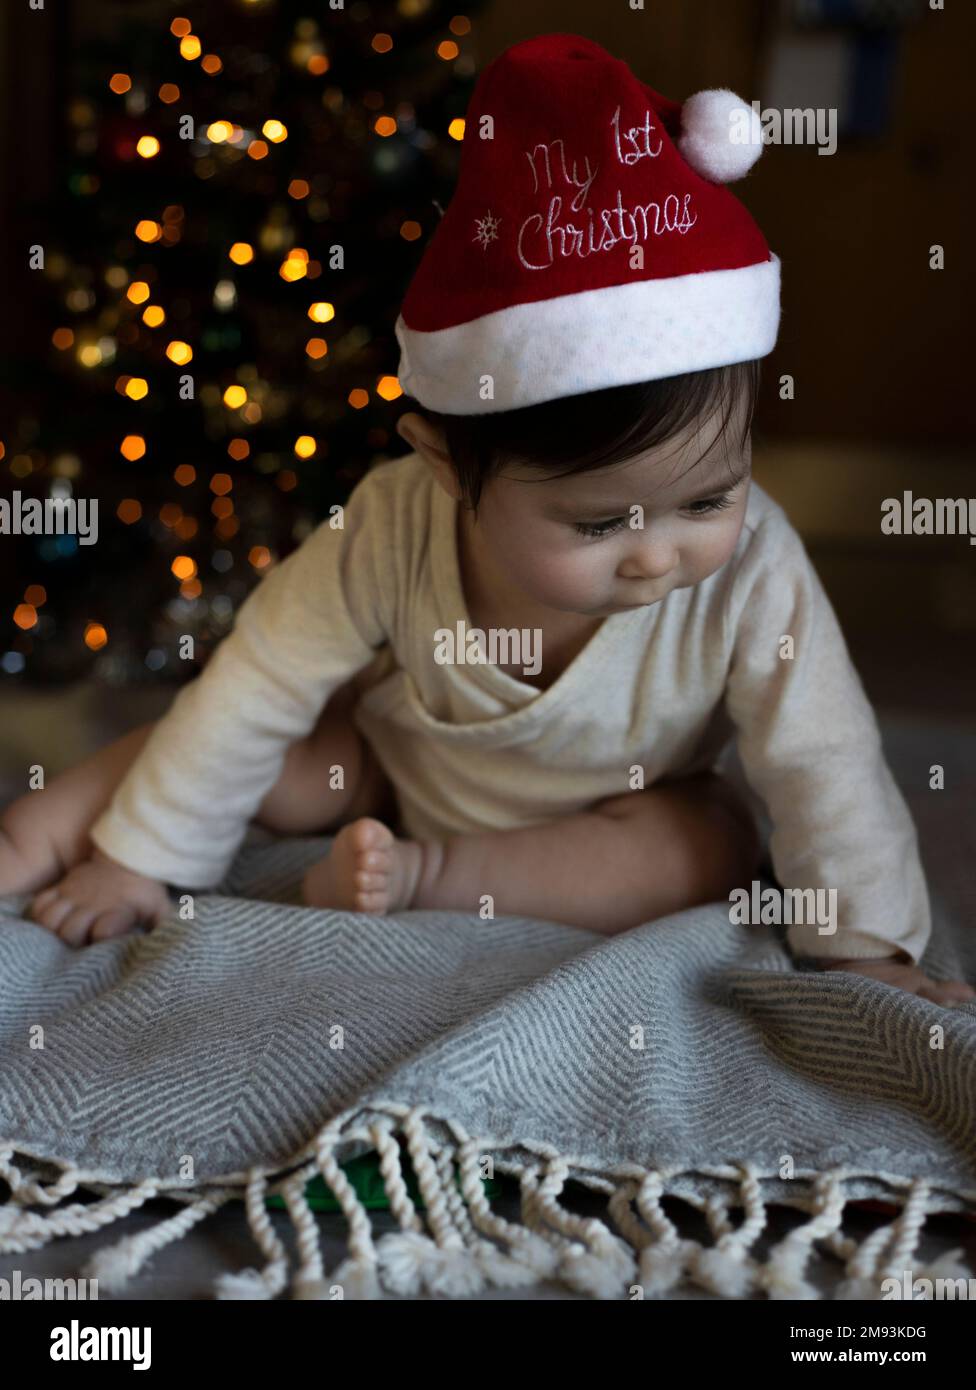 Adorable little baby wearing red christmas hat, sitting on soft blanket in front of blurry lights of christmas tree. Christmas celebration concept Stock Photo